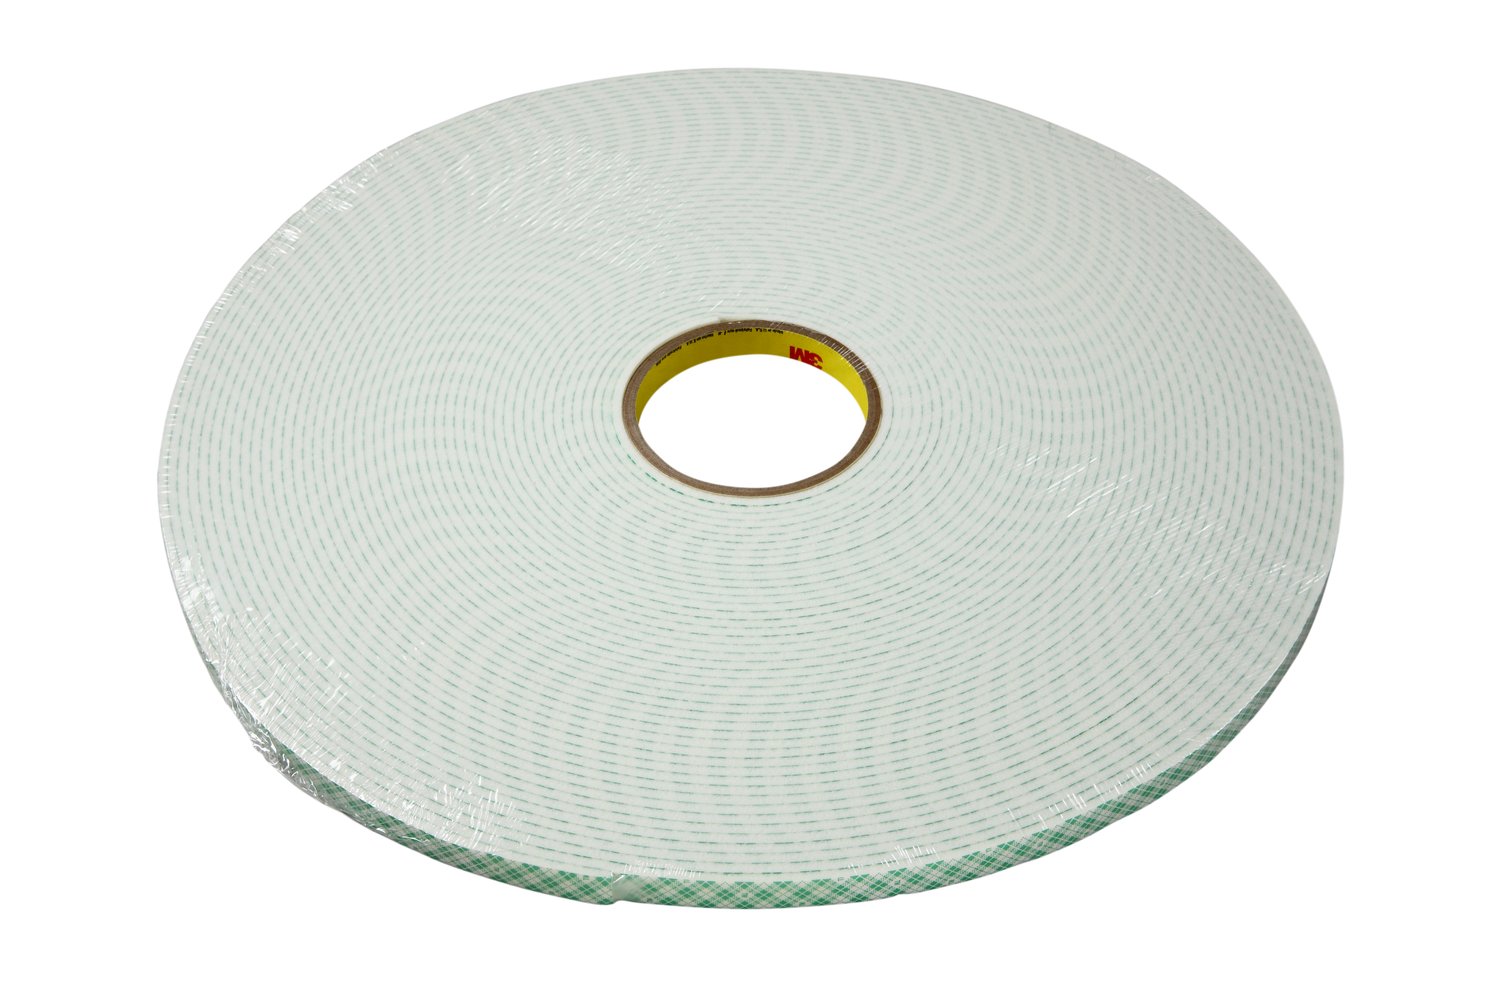 7010369073 - 3M Double Coated Urethane Foam Tape 4004, Off White, 1/4 in x 18 yd,
250 mil, 36 rolls per case